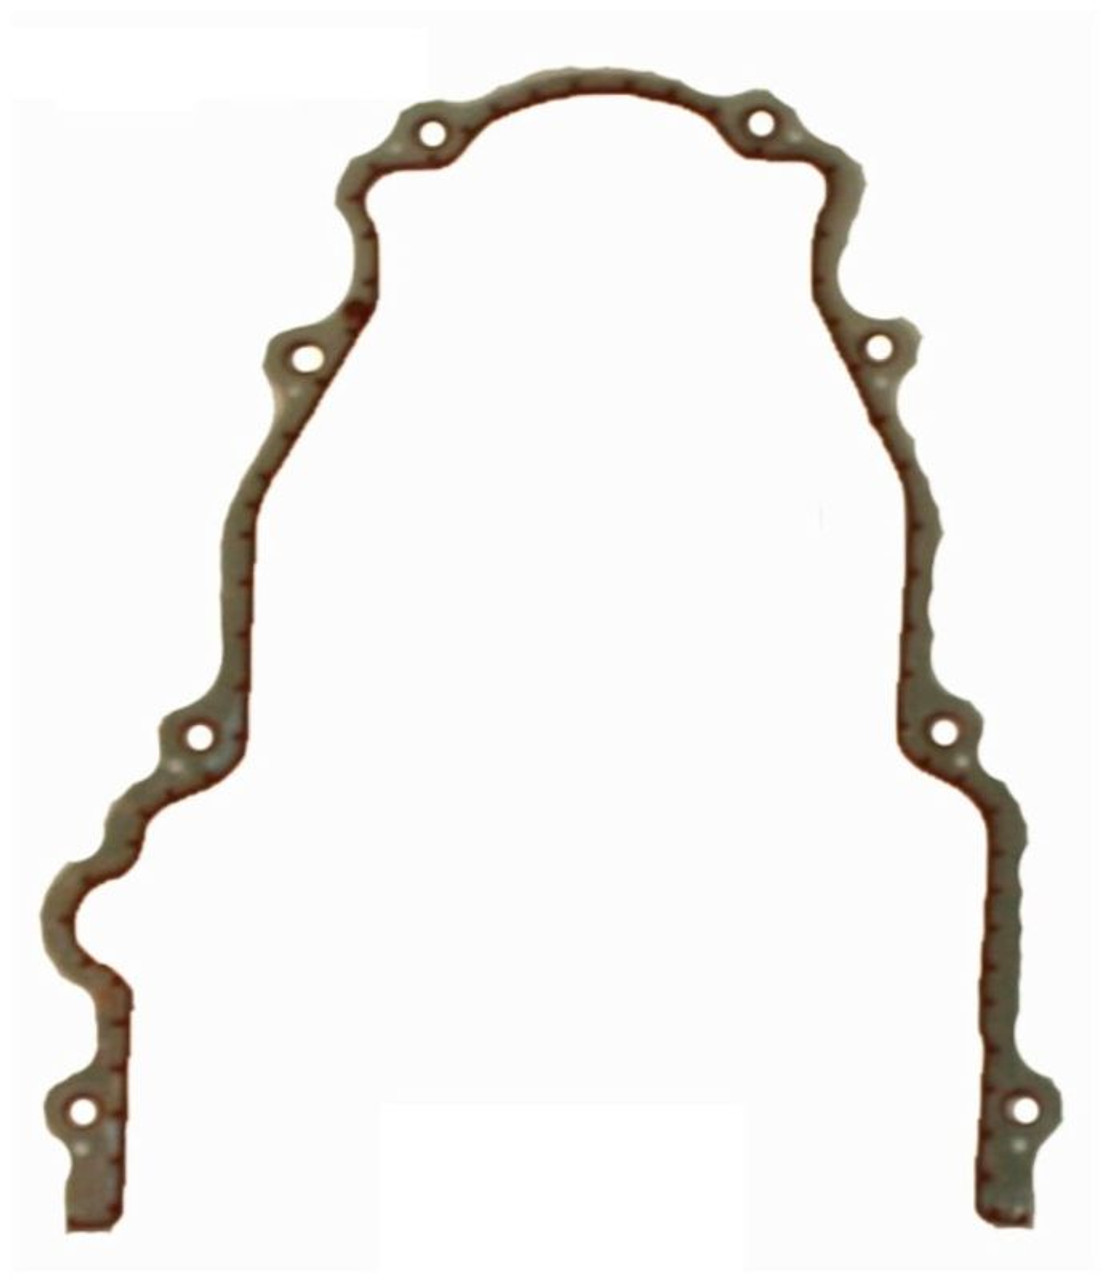 2014 Chevrolet Express 3500 6.0L Engine Timing Cover Gasket TCG293-A -873